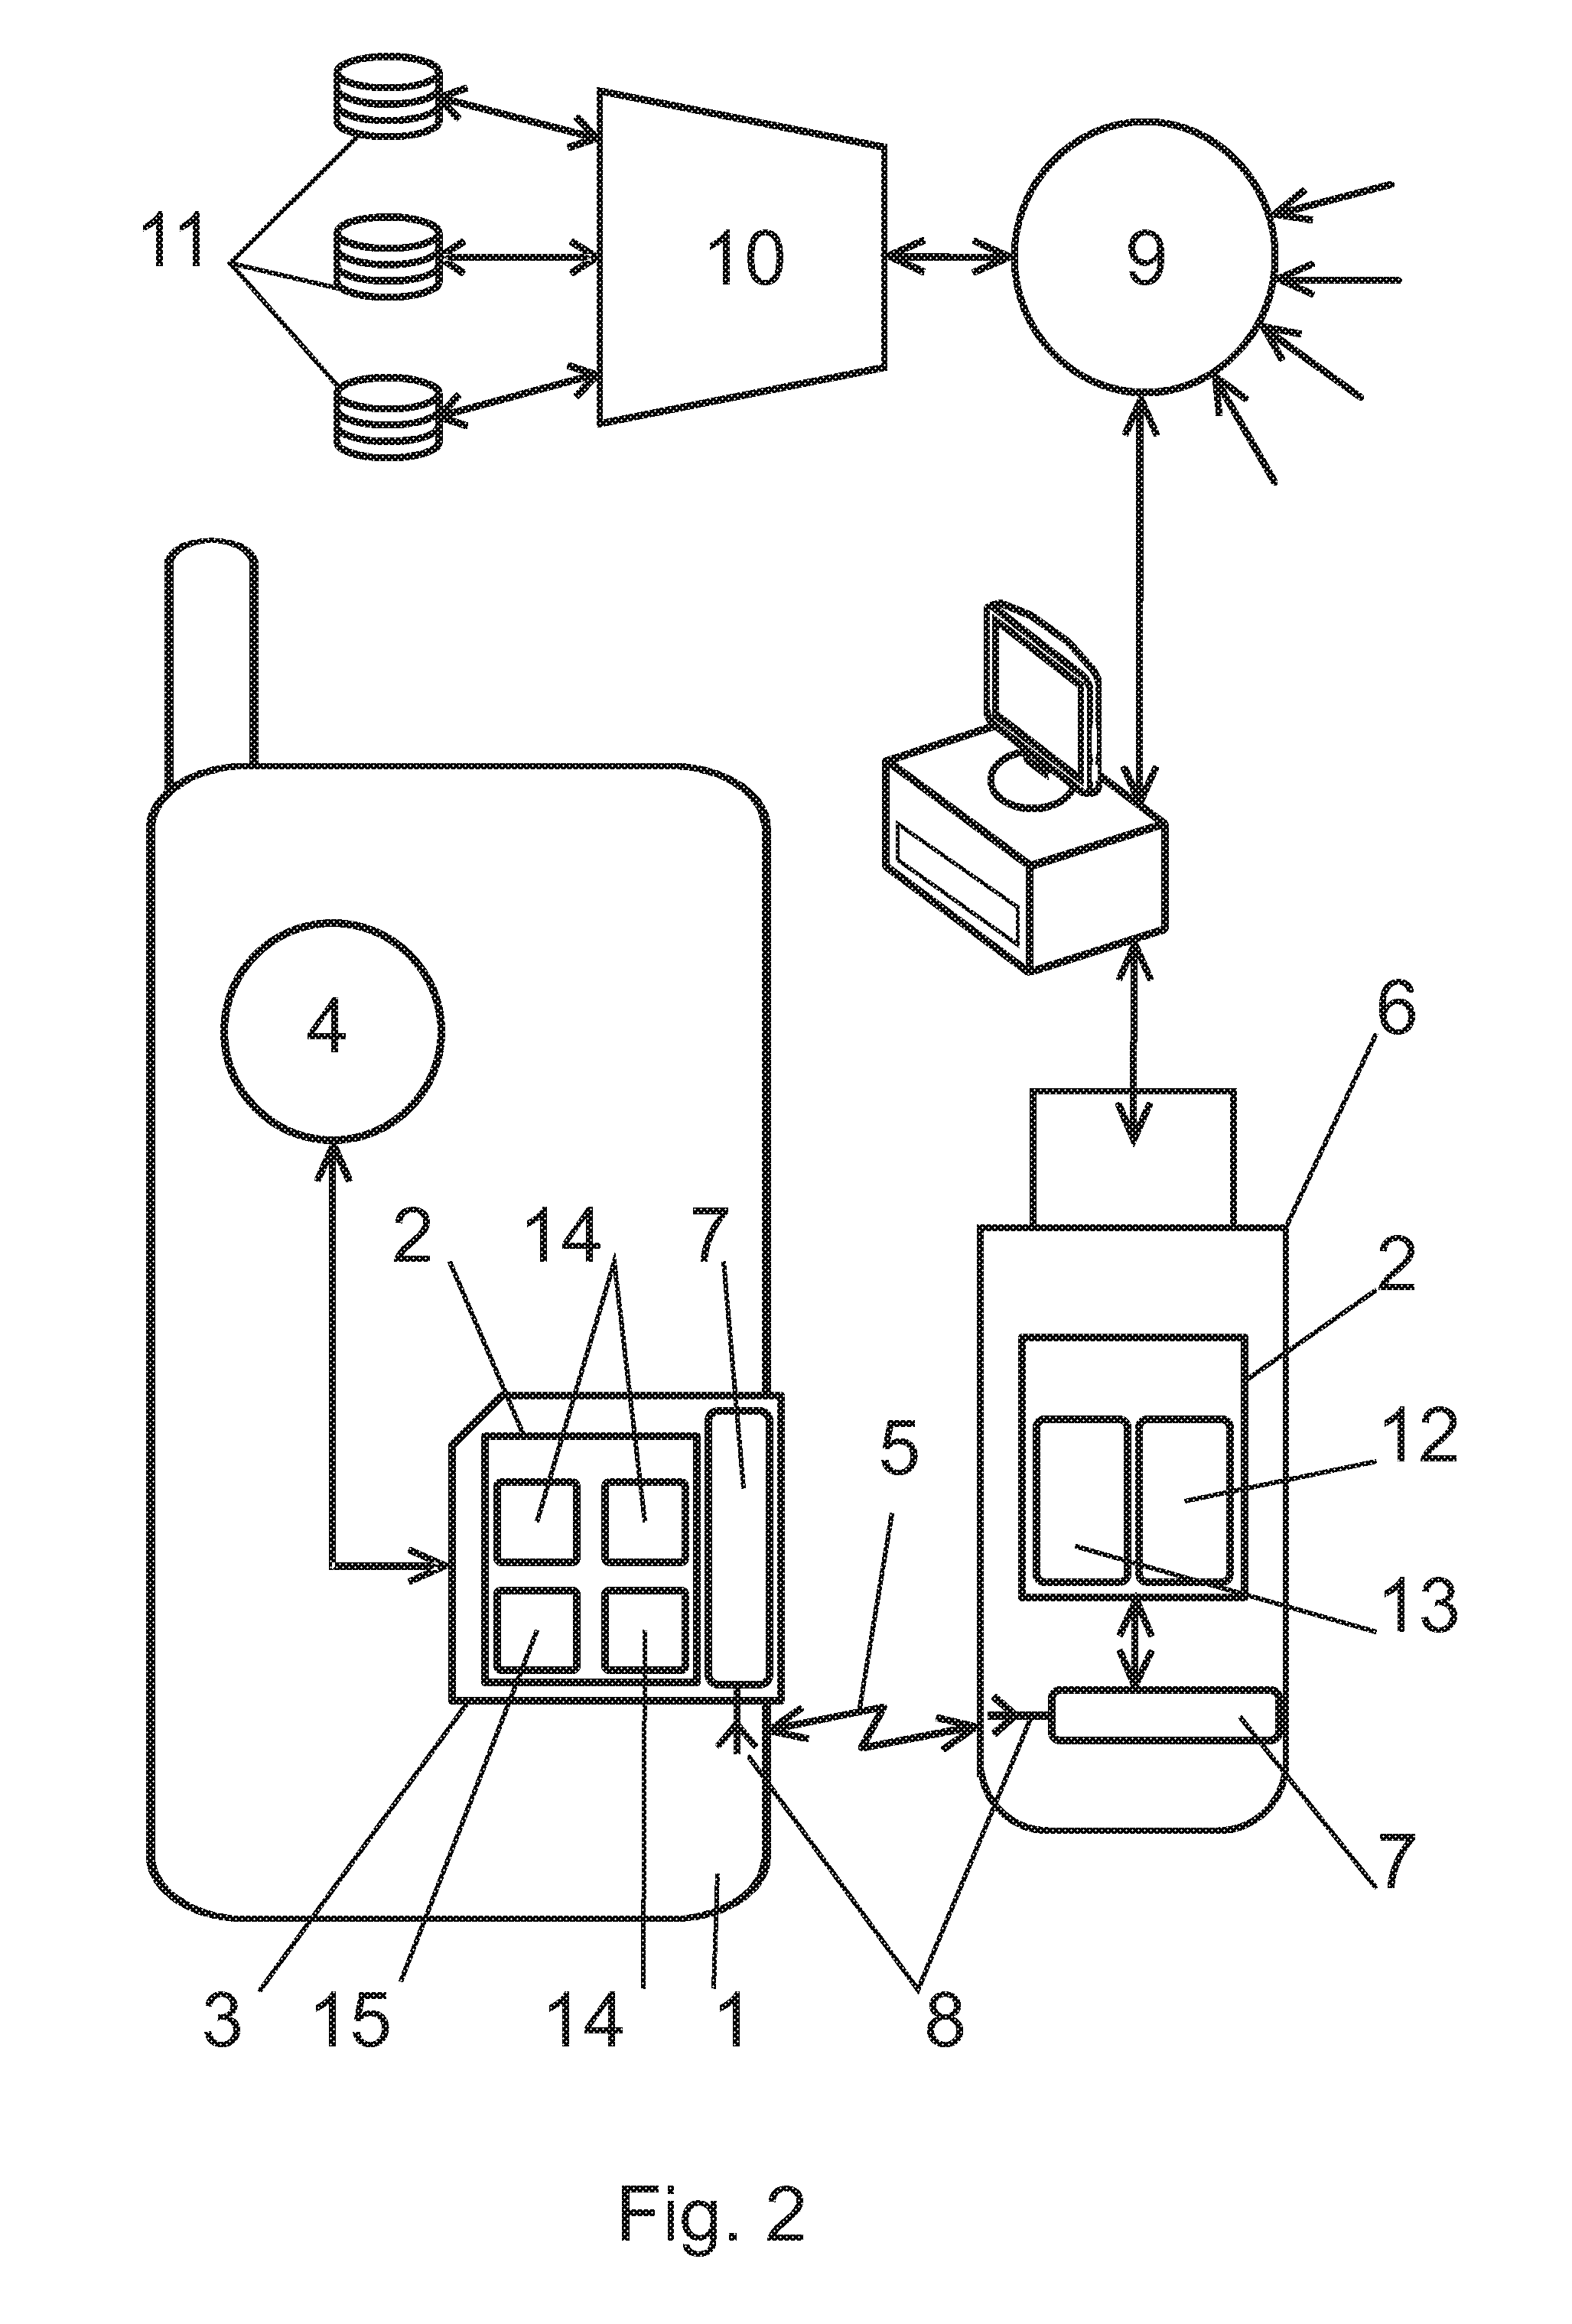 Electronic payment application system and payment authorization method